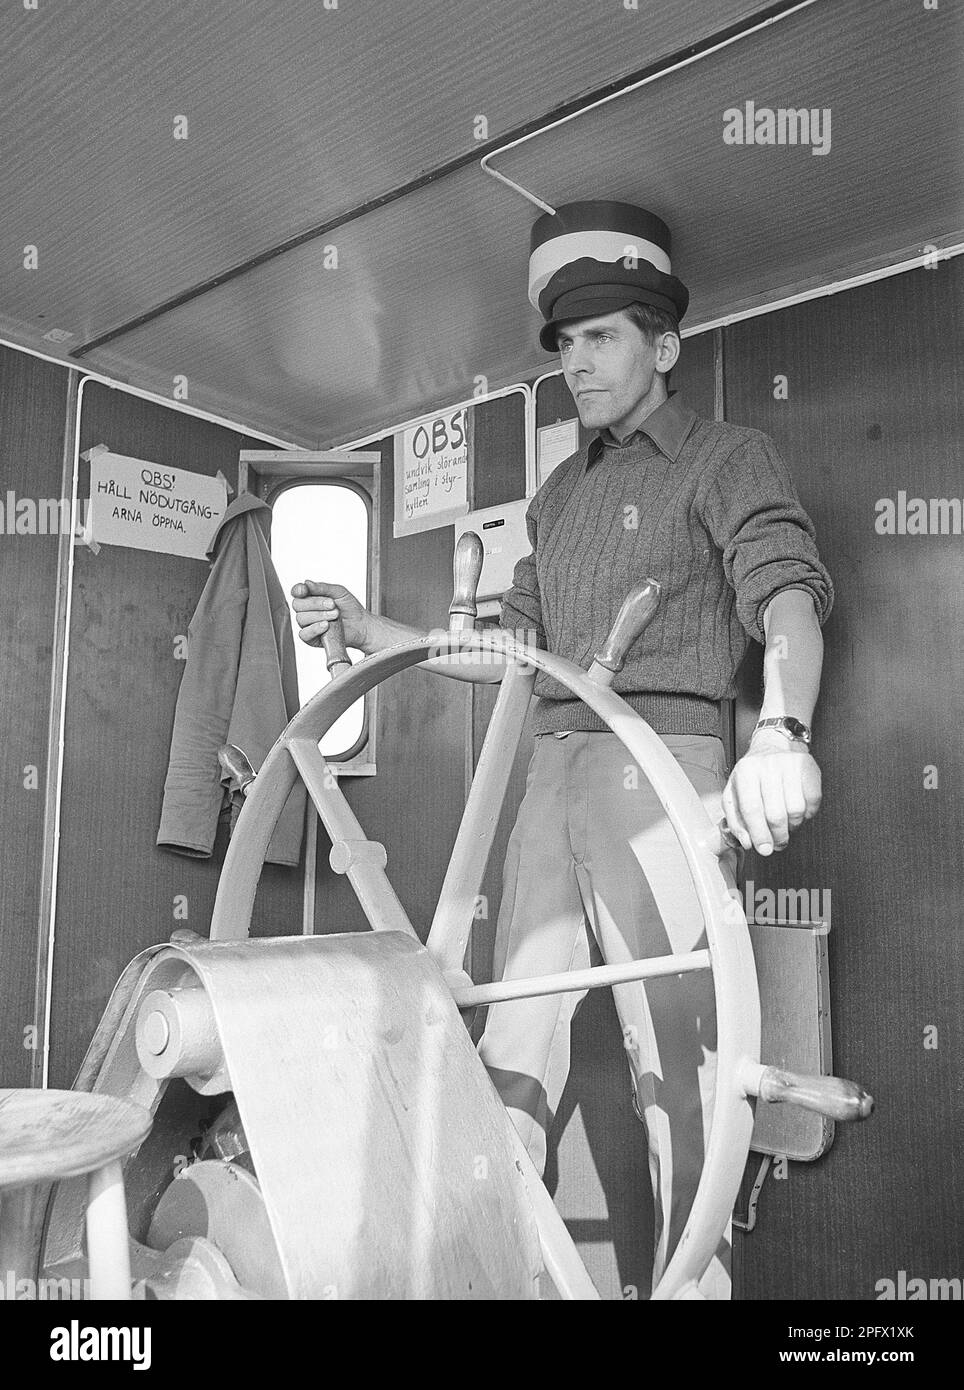 At the rudder. A man at the rudder steer the ship on course, he looks focused on what's ahead.     Sweden 1970 ref ED1 Stock Photo